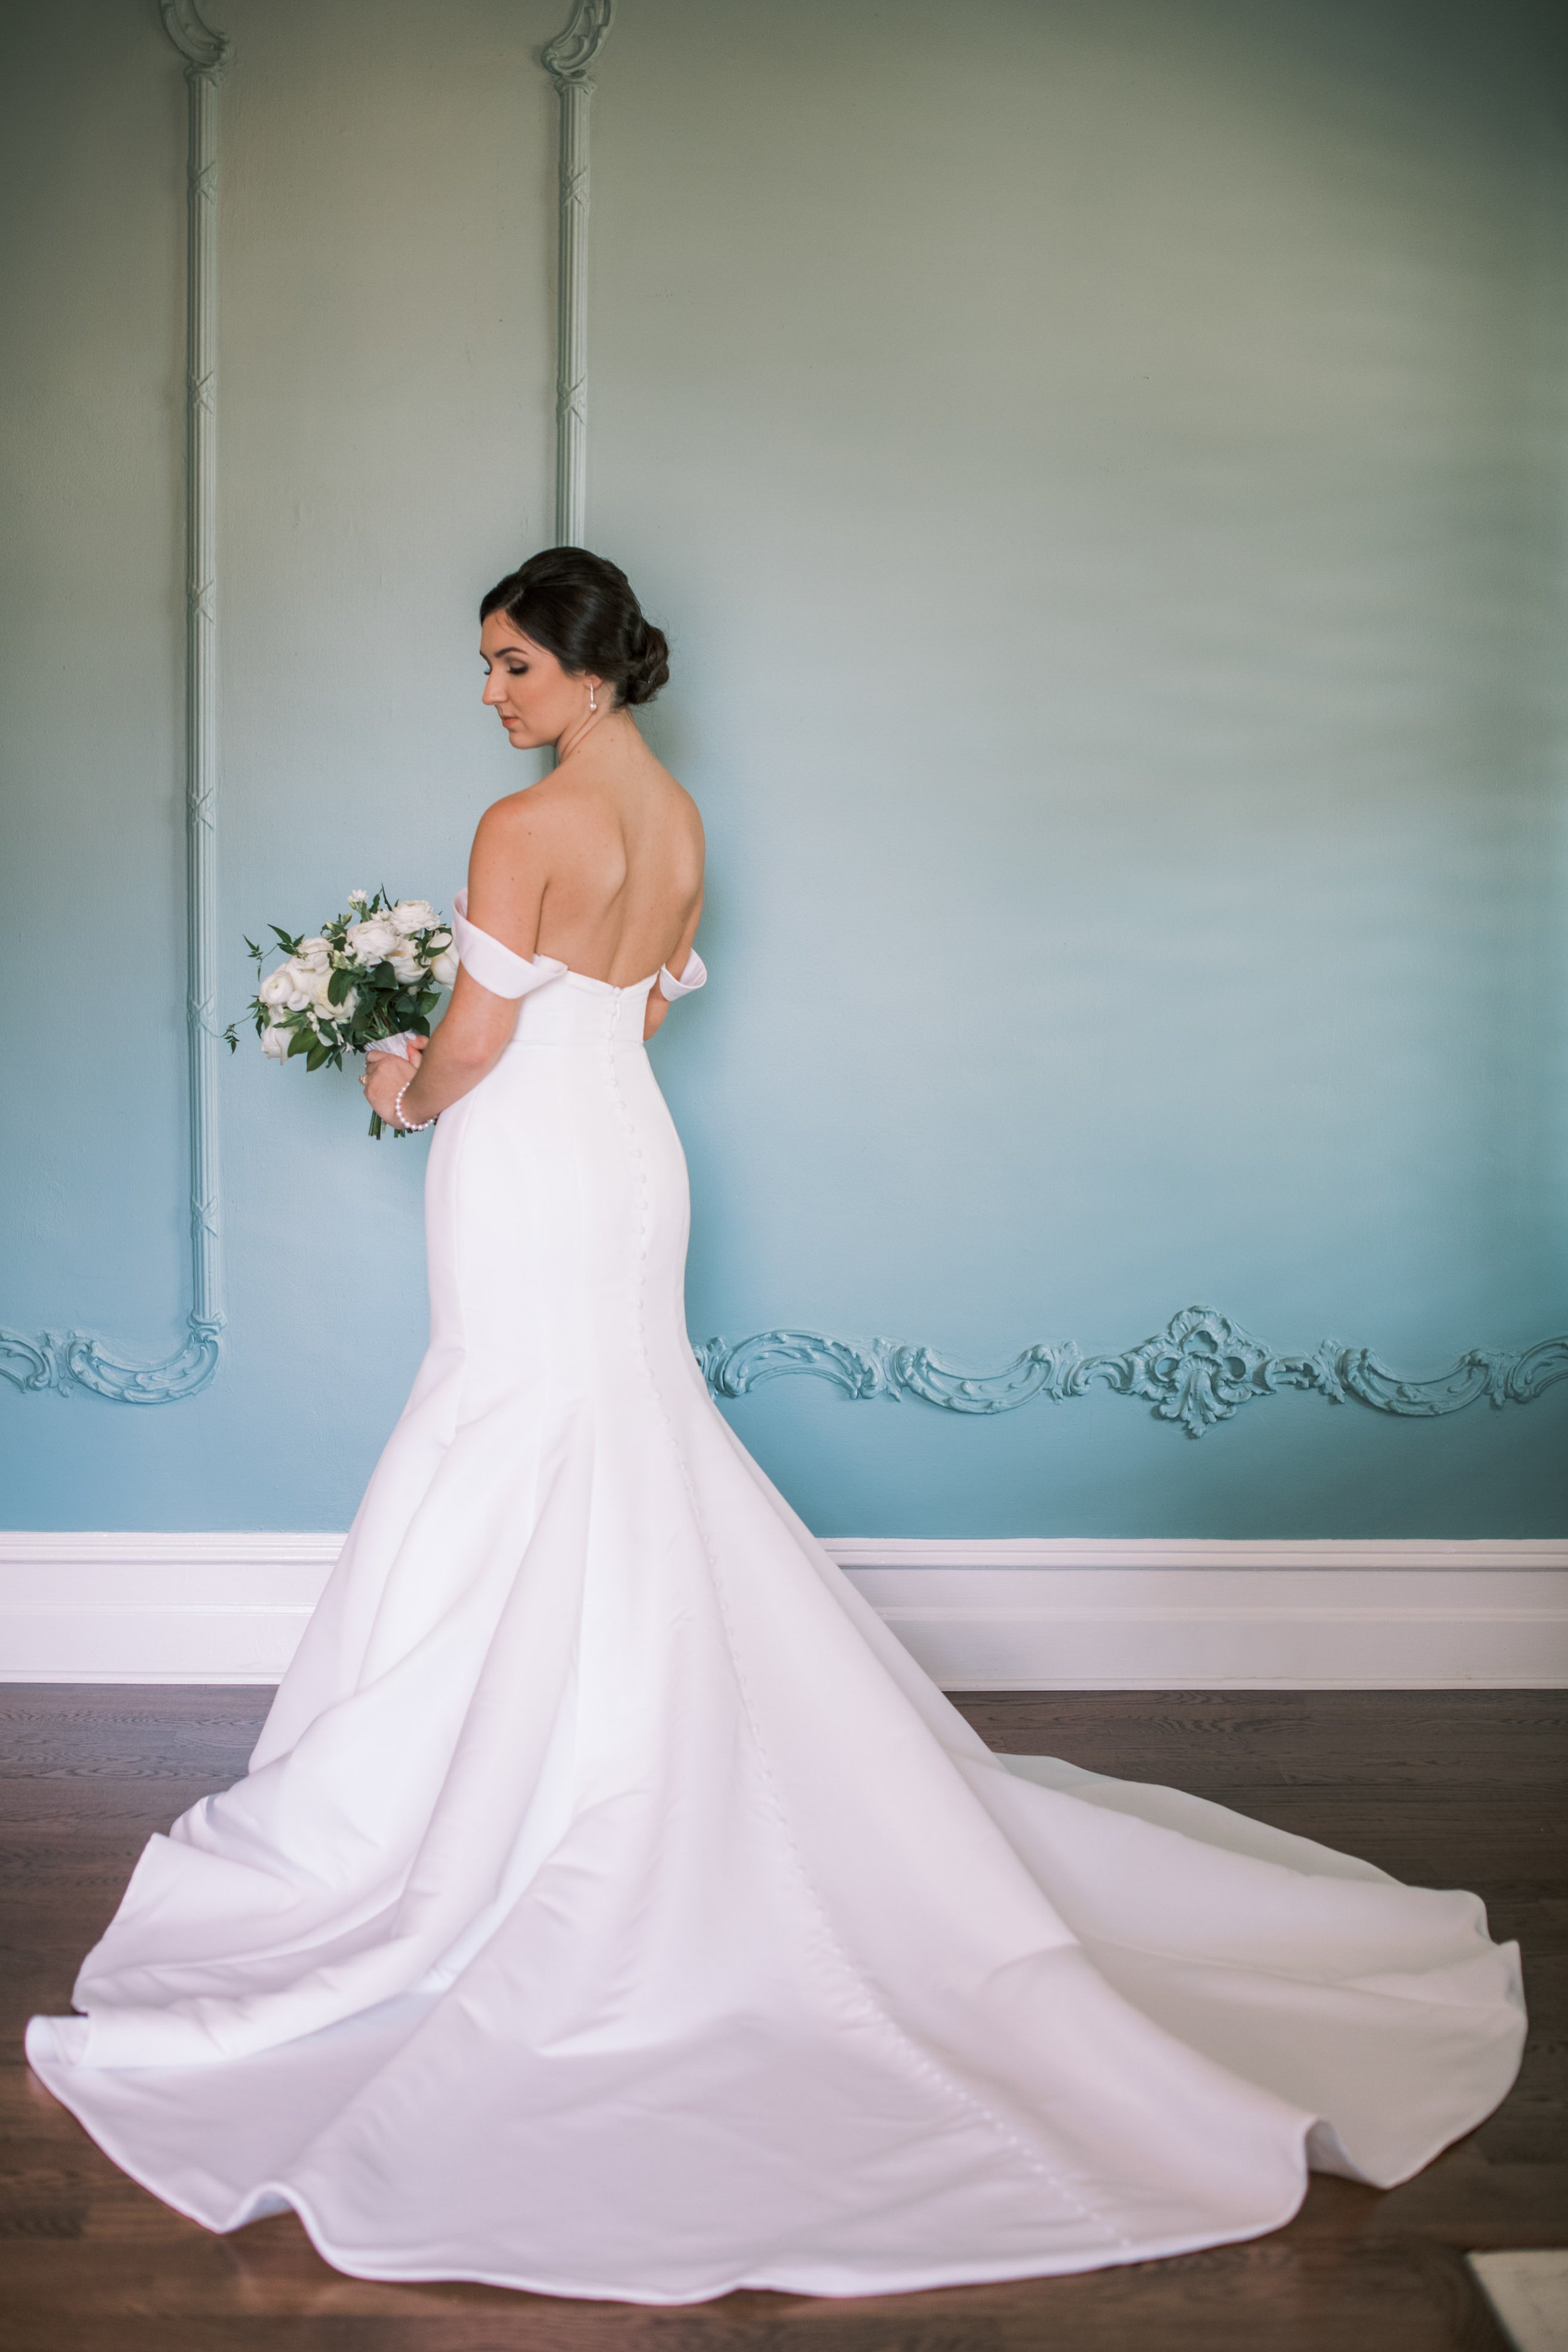 Elegant Bridal Portraits at River Forest Manor and Marina Fancy This Photography